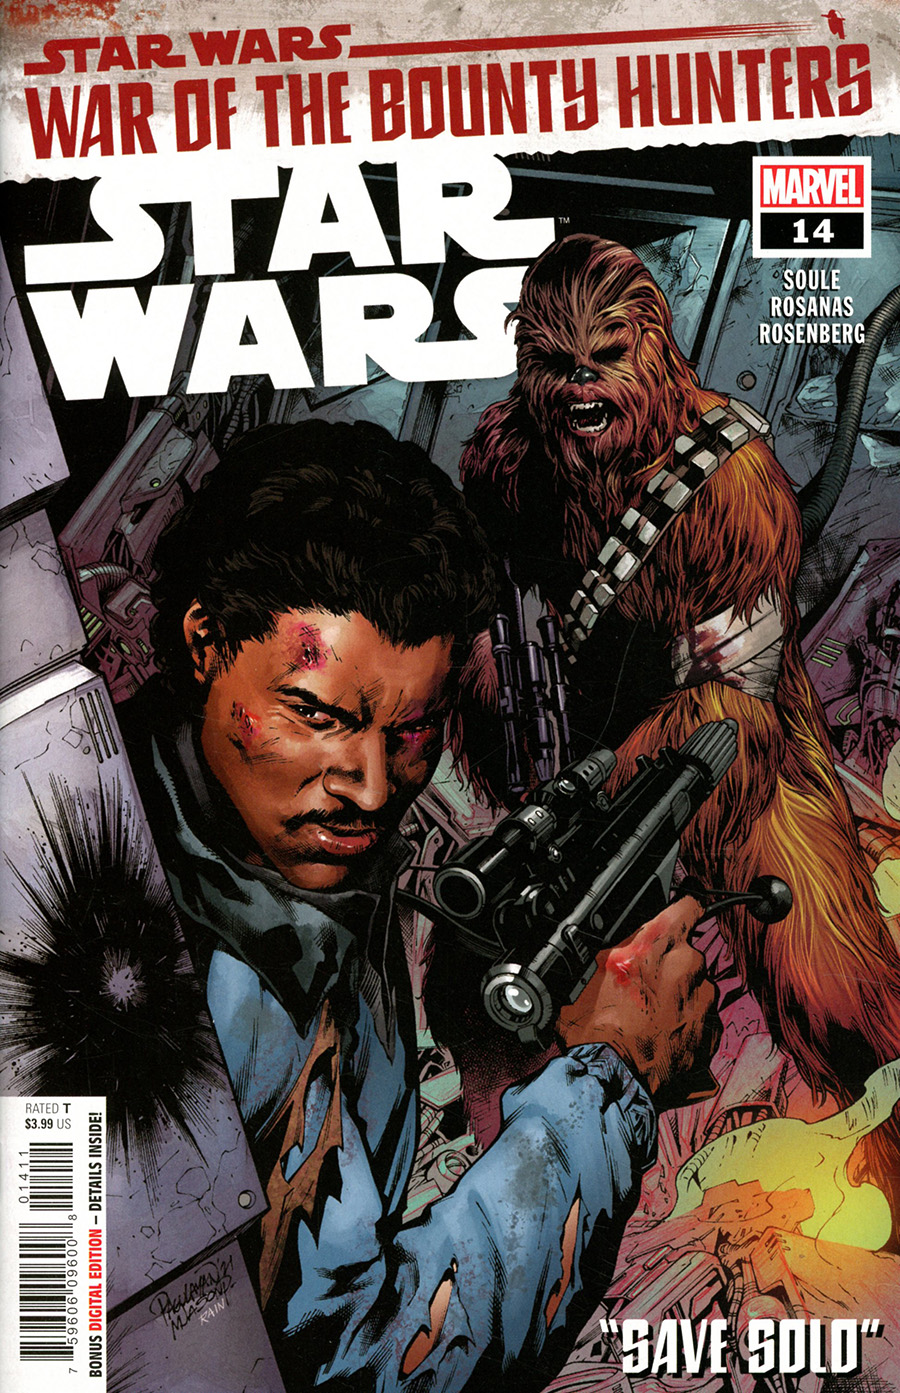 Star Wars Vol 5 #14 Cover A Regular Carlo Pagulayan Cover (War Of The Bounty Hunters Tie-In)